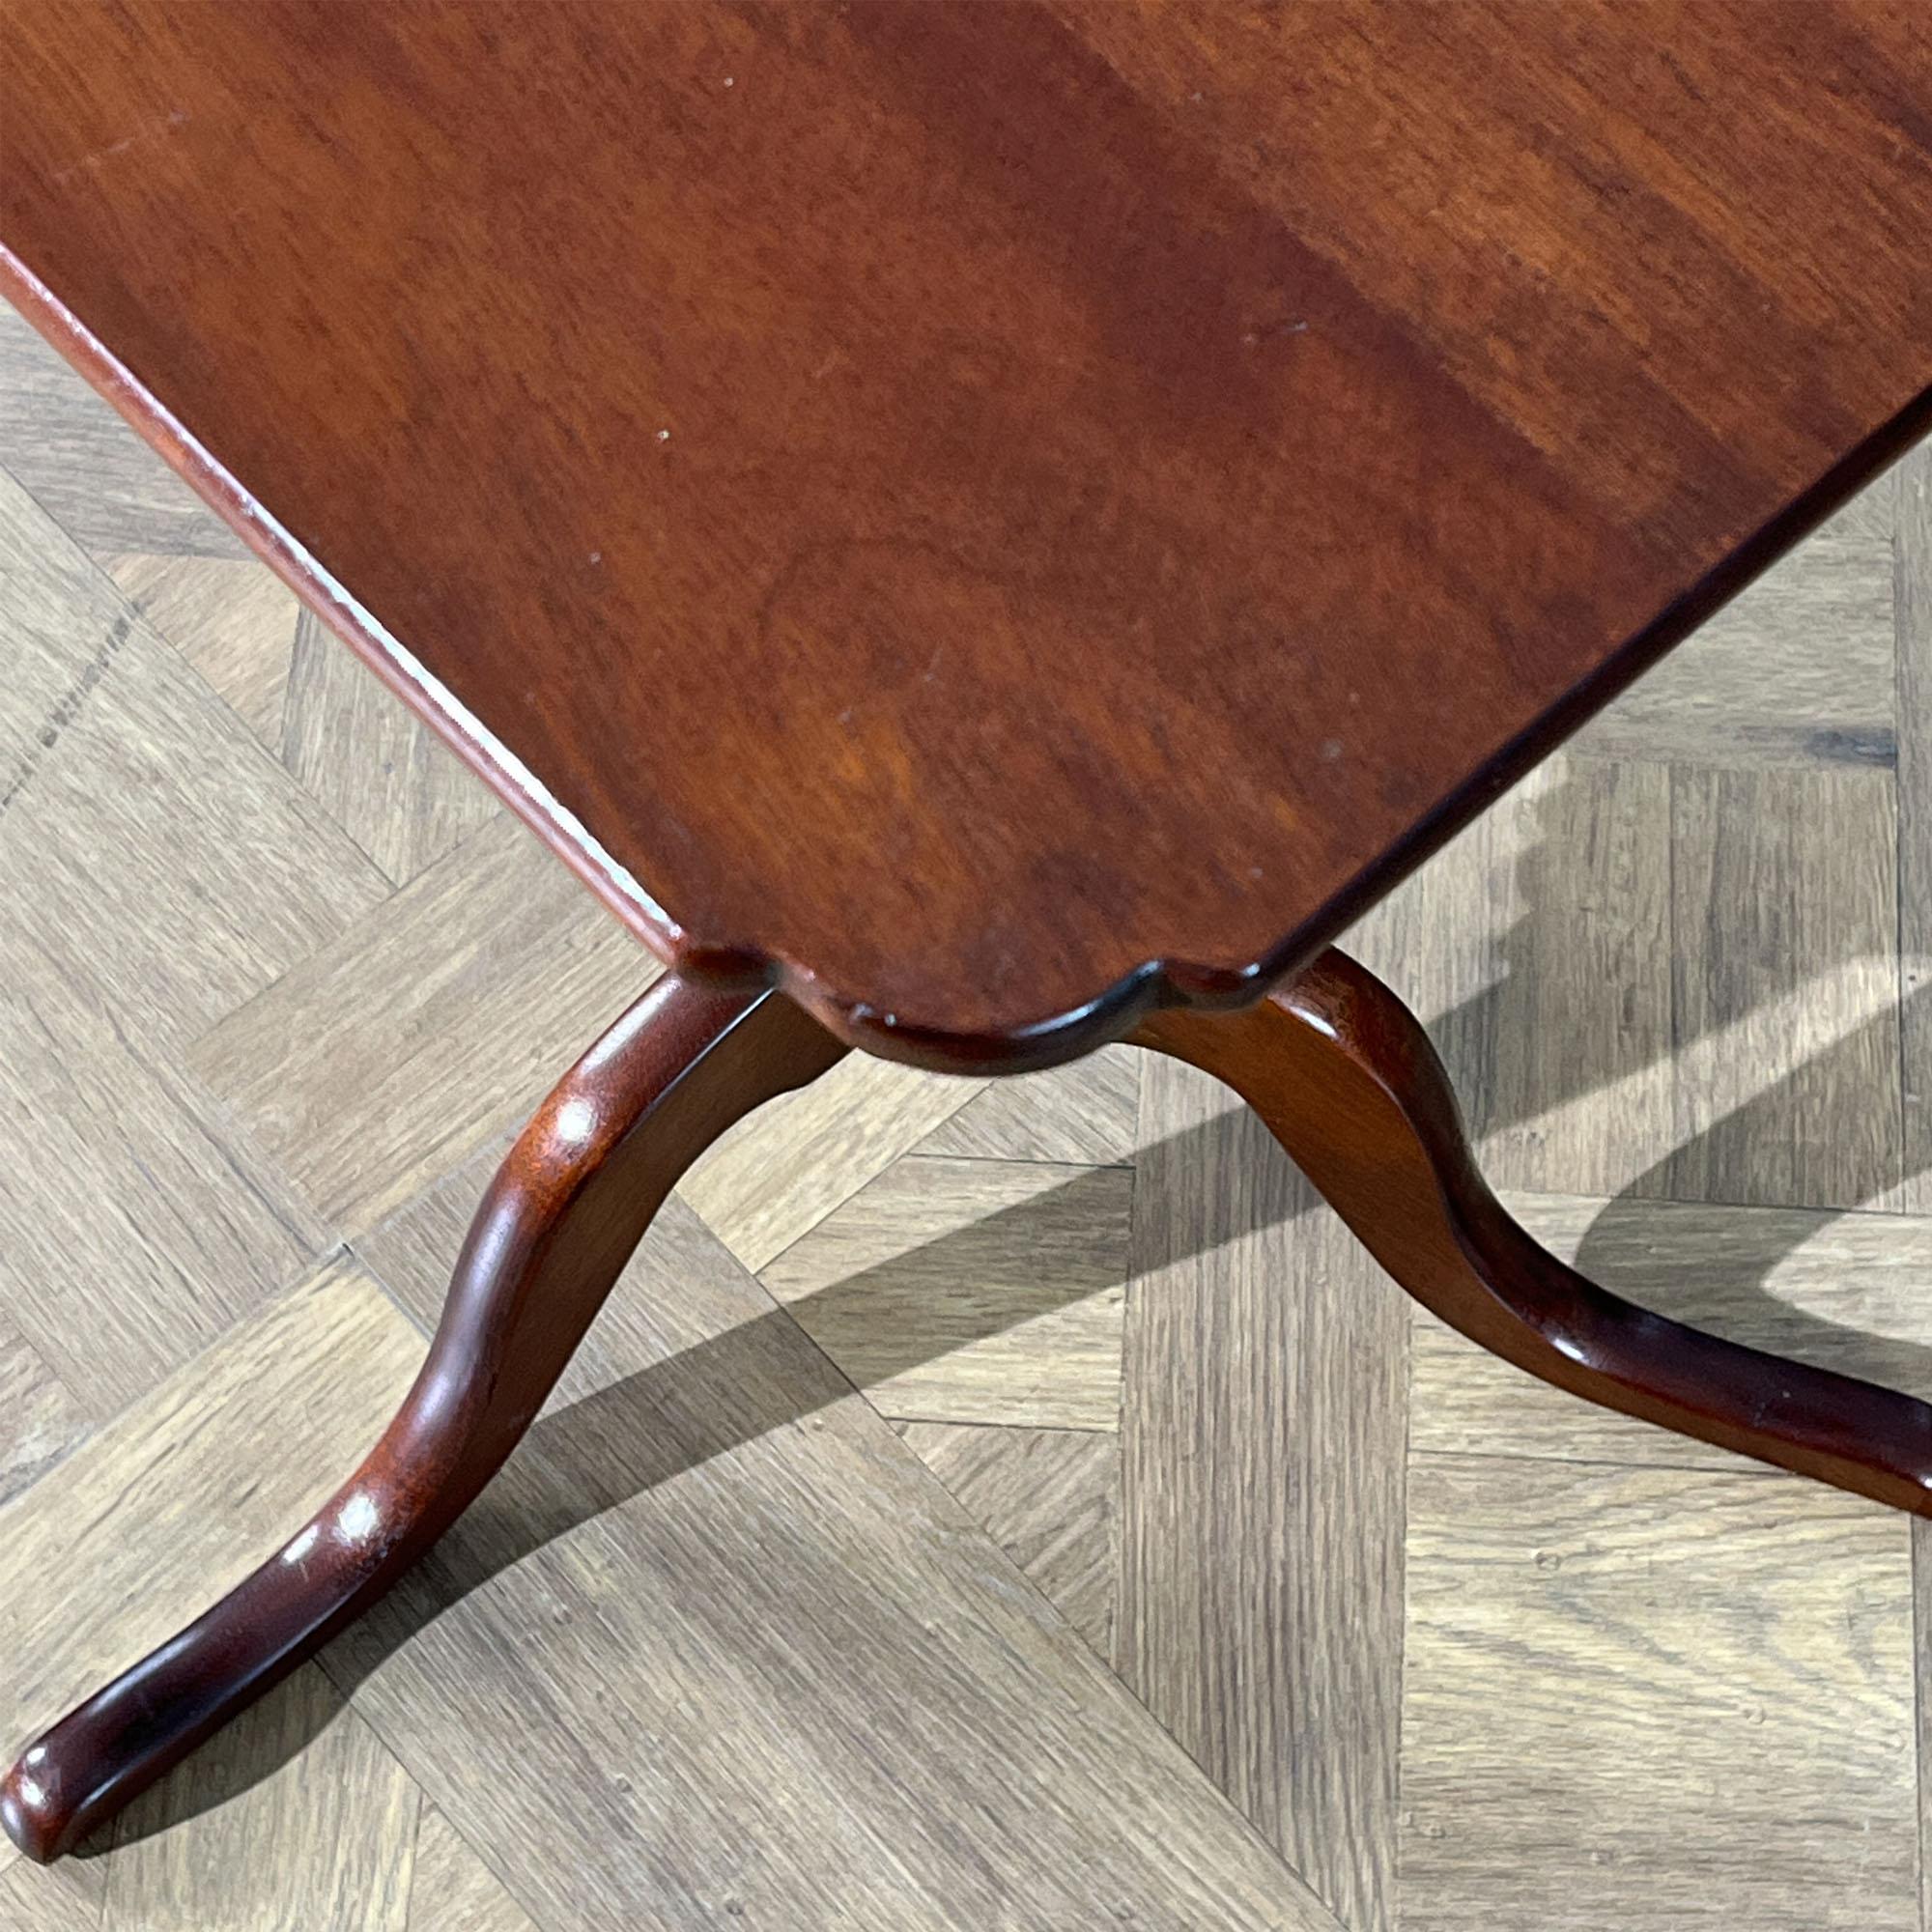 Vintage Small Mahogany Table In Good Condition For Sale In Annville, PA